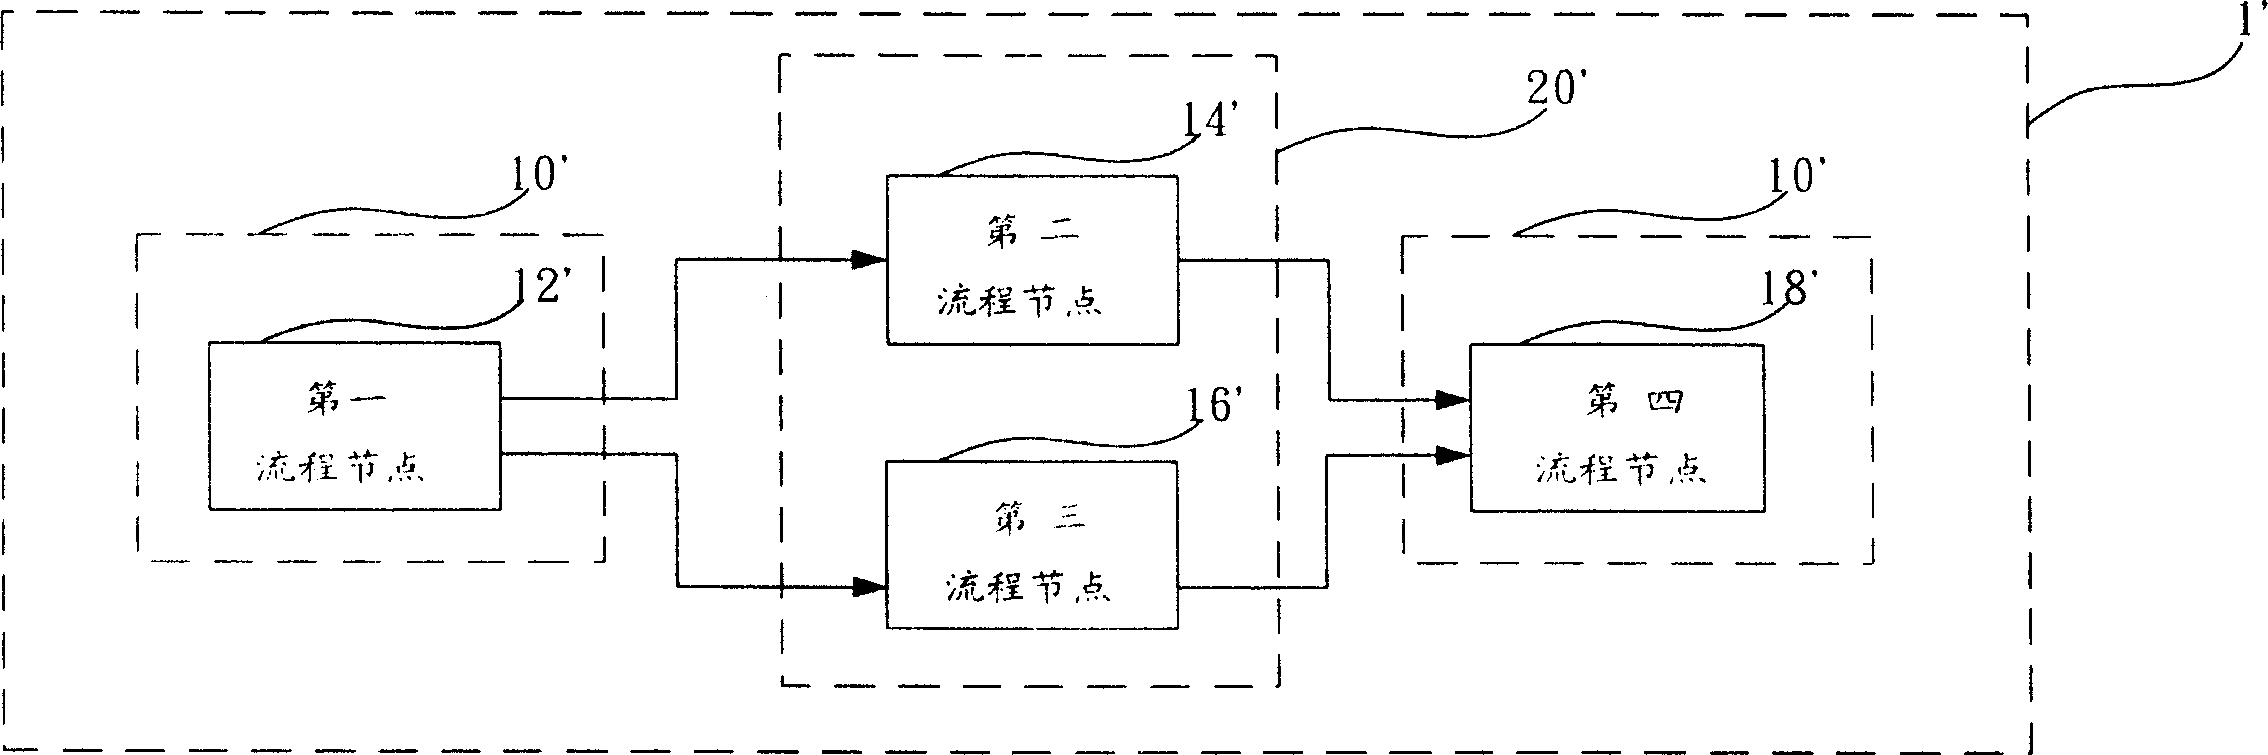 Flow verification system and method